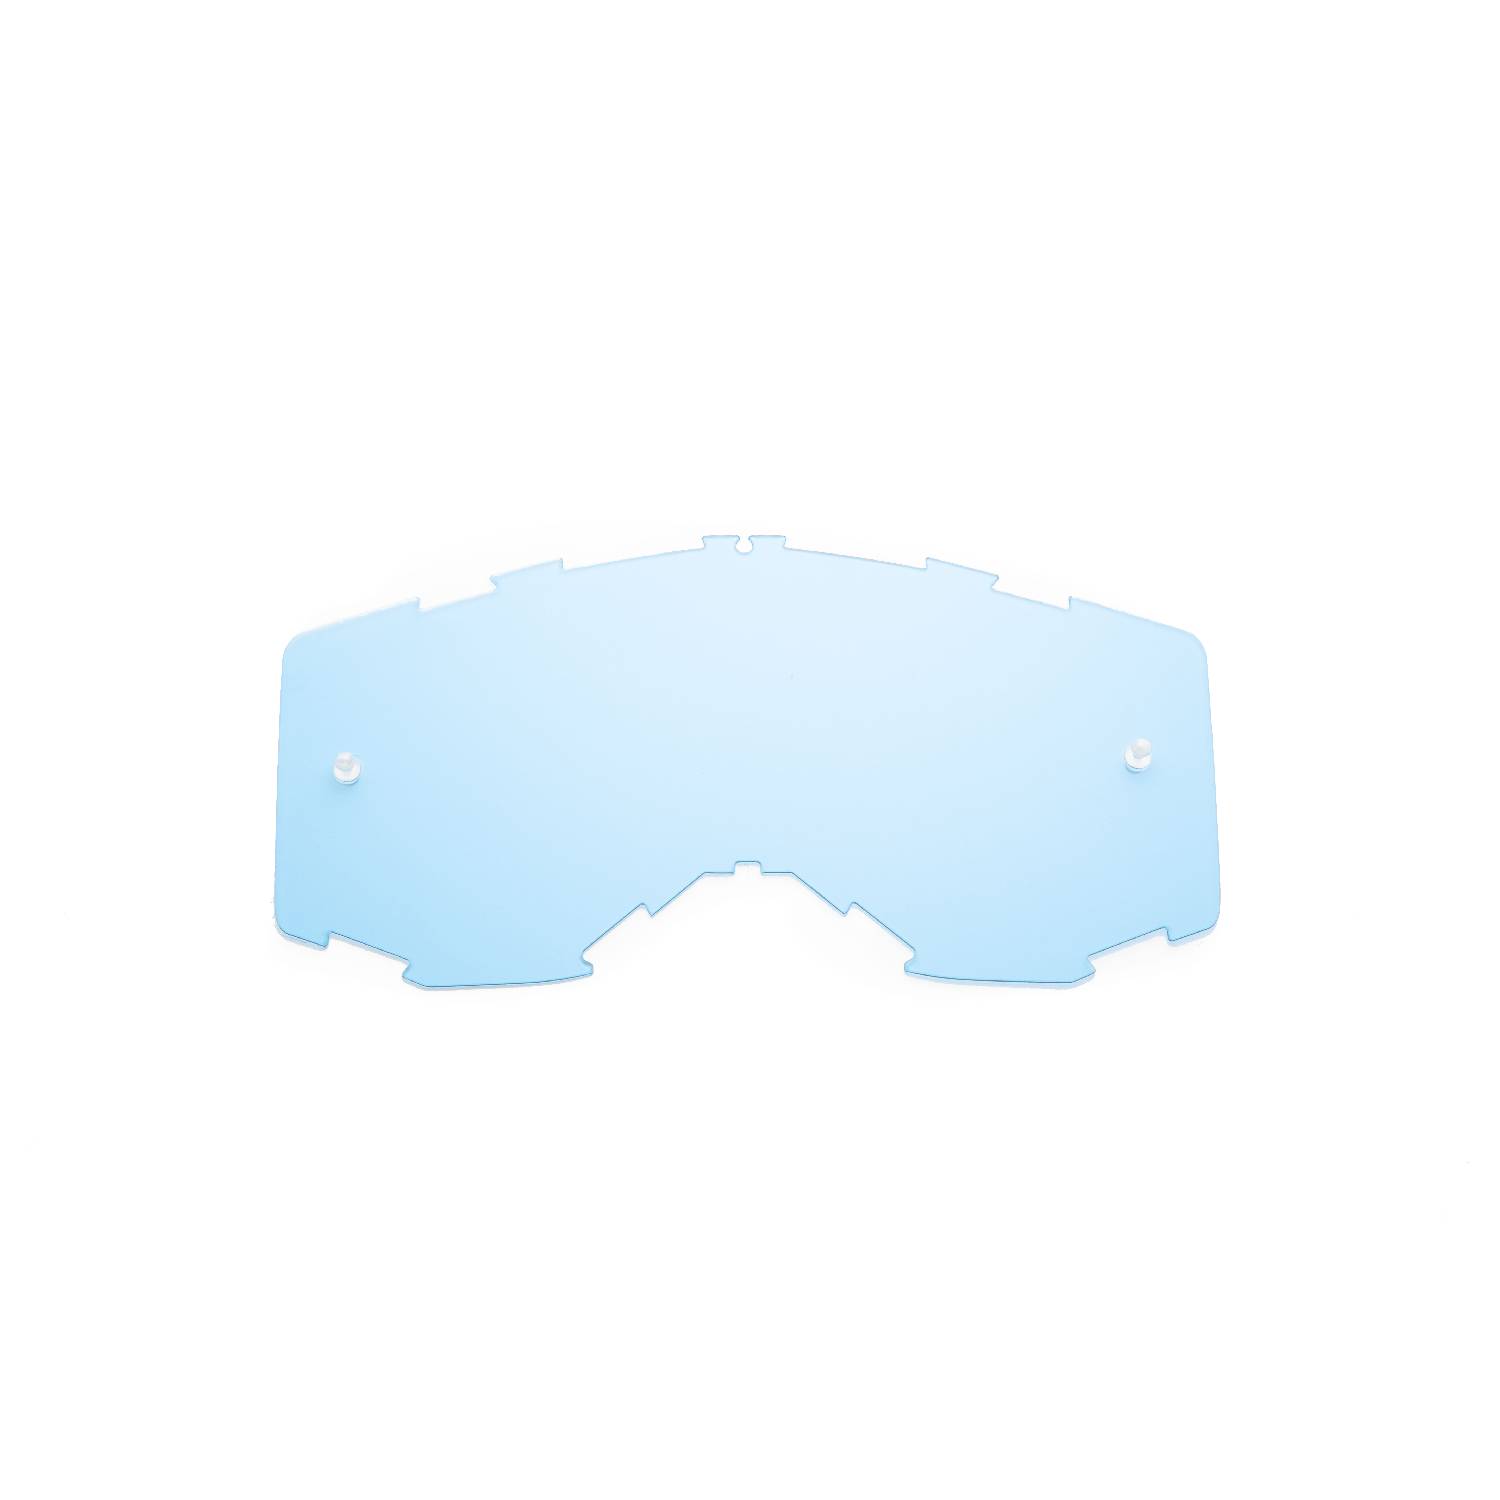 blue replacement lenses for goggles compatible for Aka Magnetika / Vortika goggle